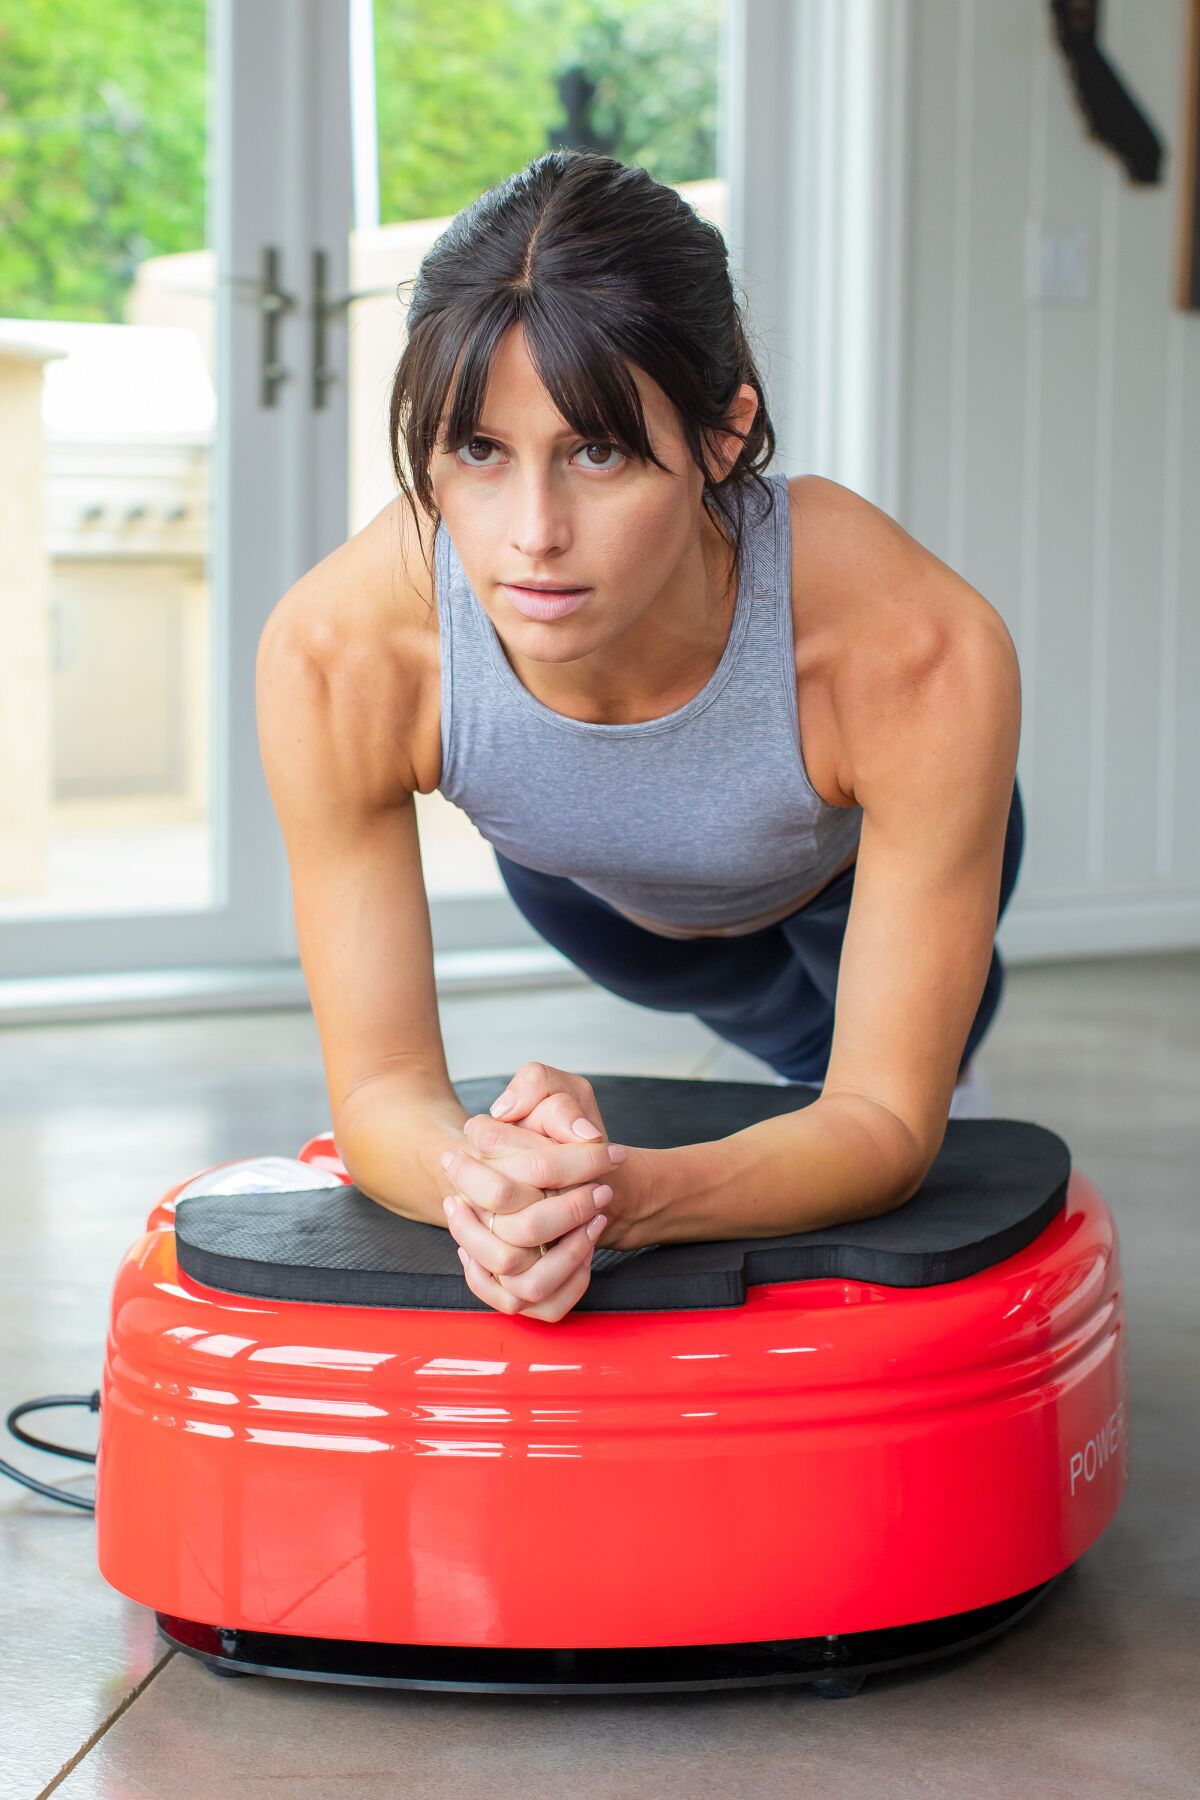 The Powerplate Move is easy to use, adjusts intensities smoothly, and has an app offering guidance and classes.